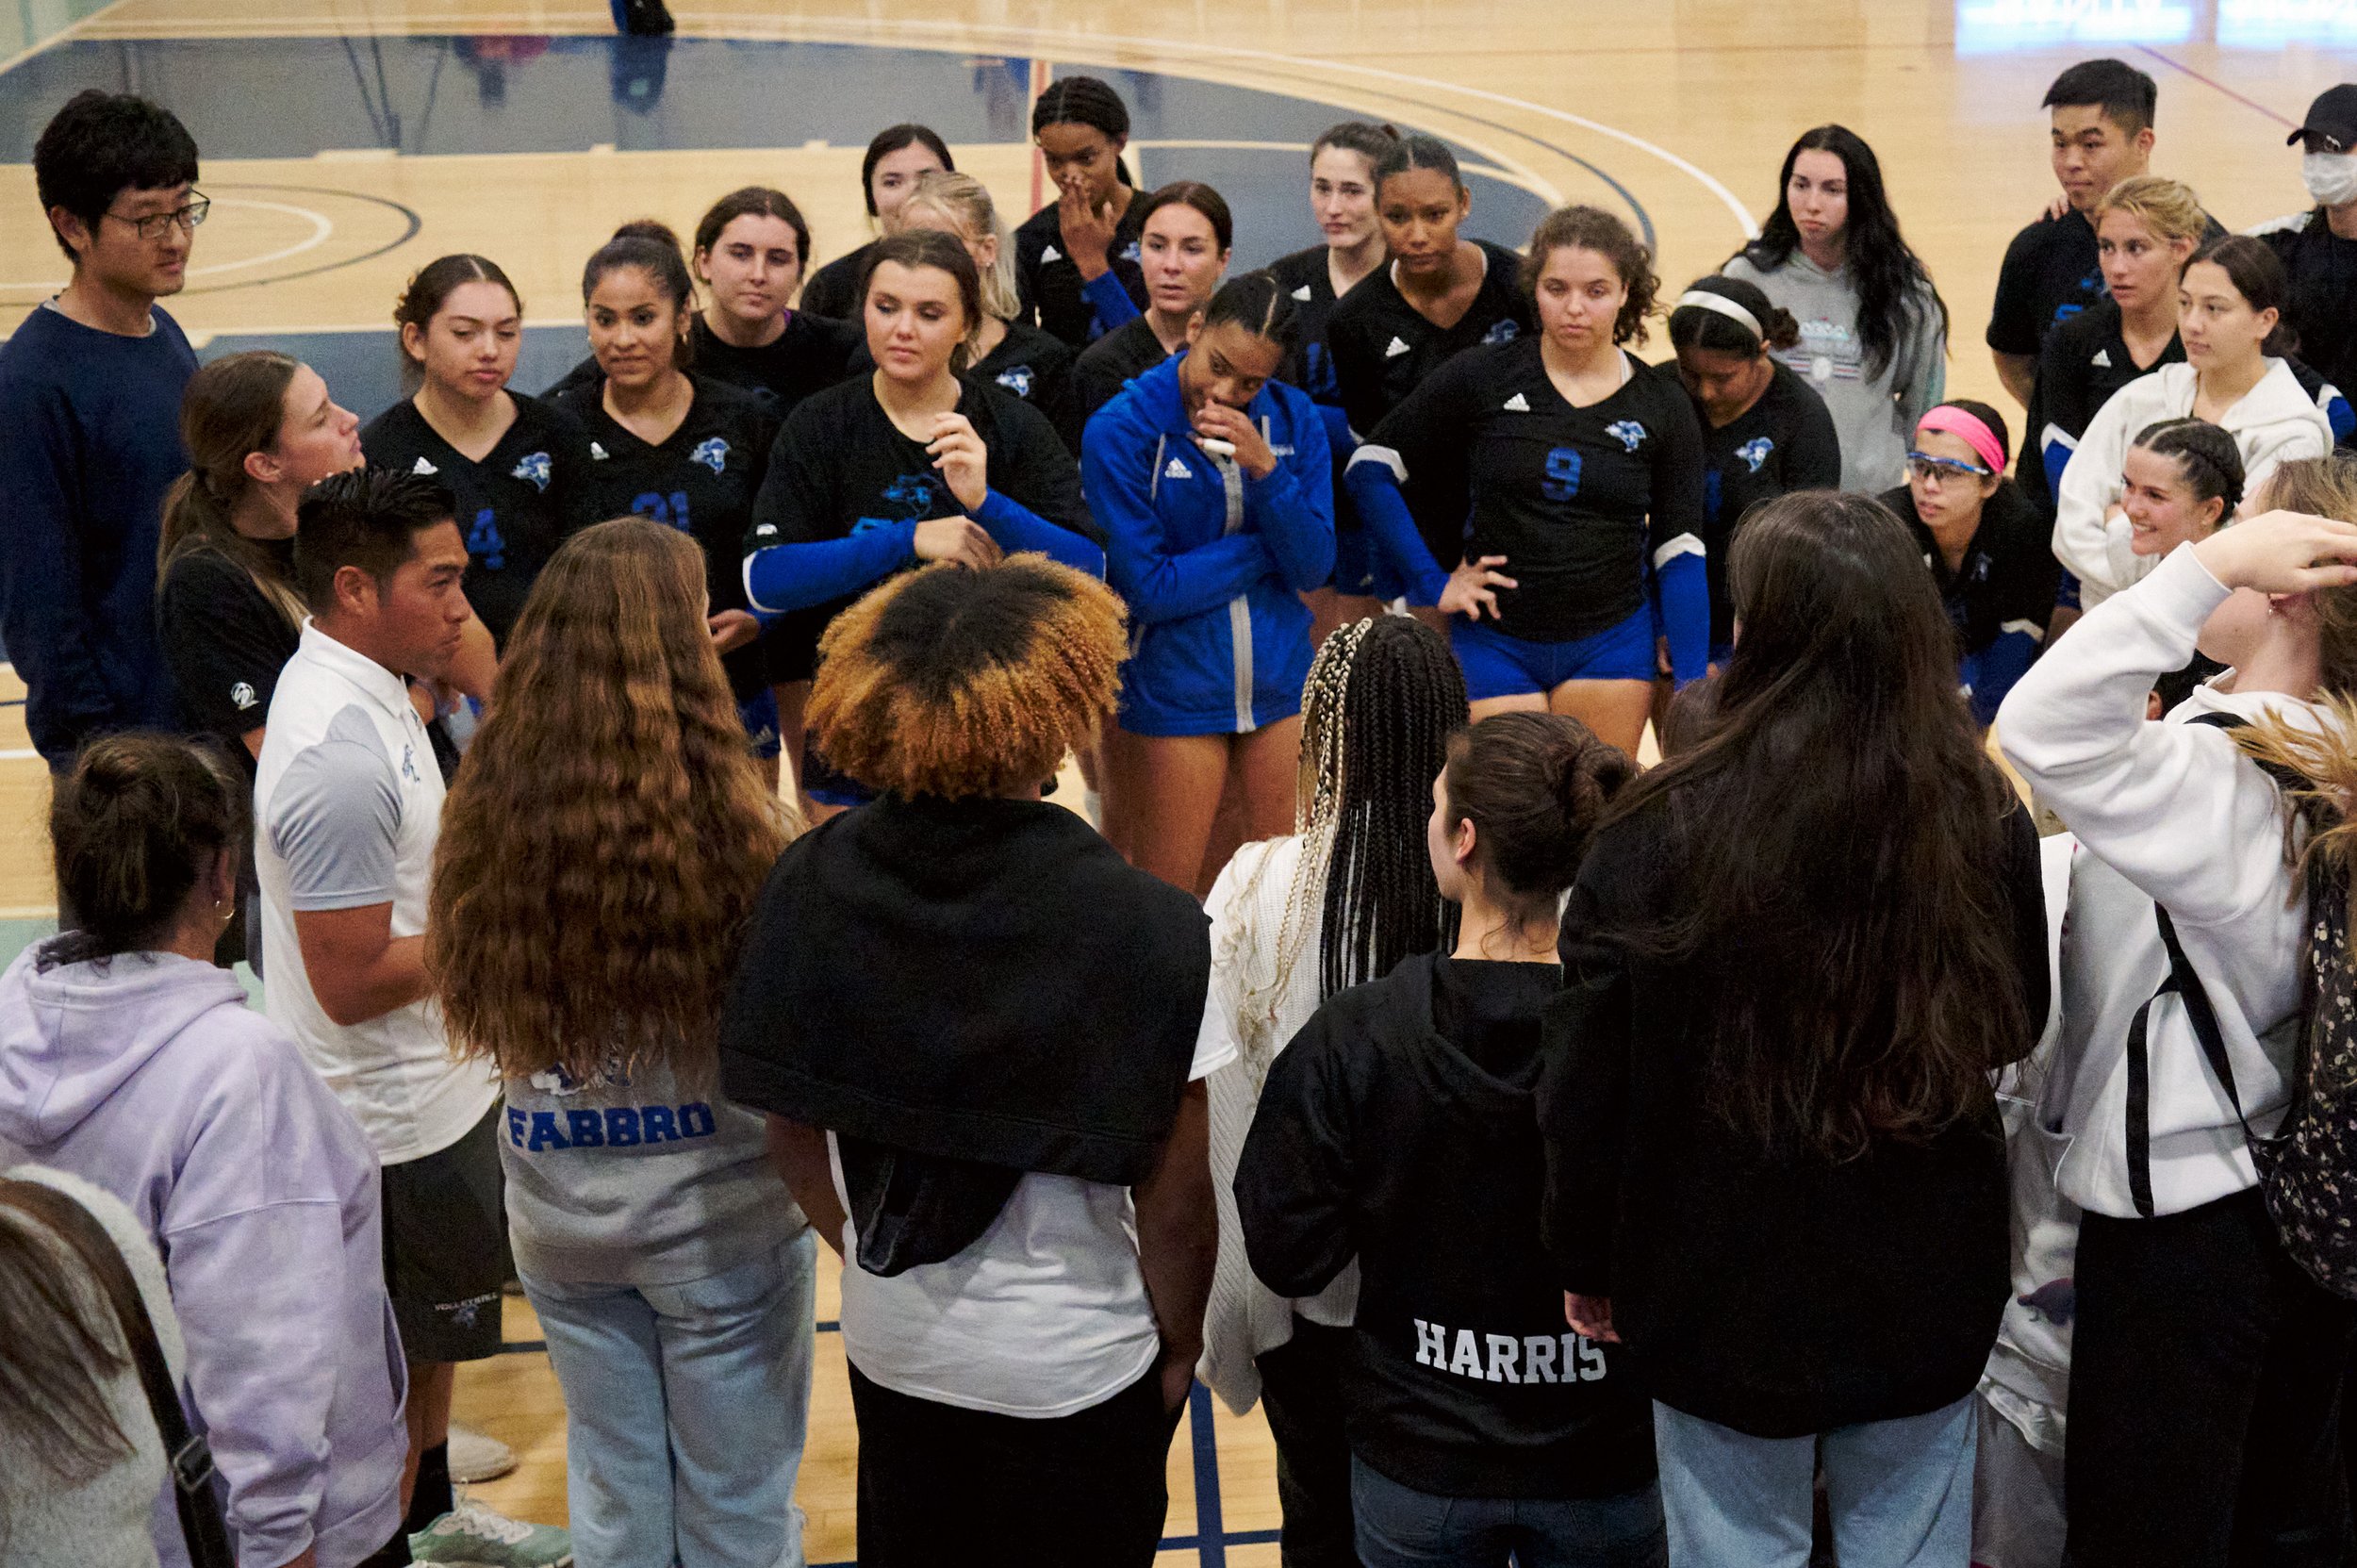  The Santa Monica College Corsairs Women's Volleyball team meets the University High School Volleyball Varsity team after game against the West Los Angeles College Wildcats on Wednesday, Oct. 26, 2022, at SMC Gym in Santa Monica, Calif. The Corsairs 